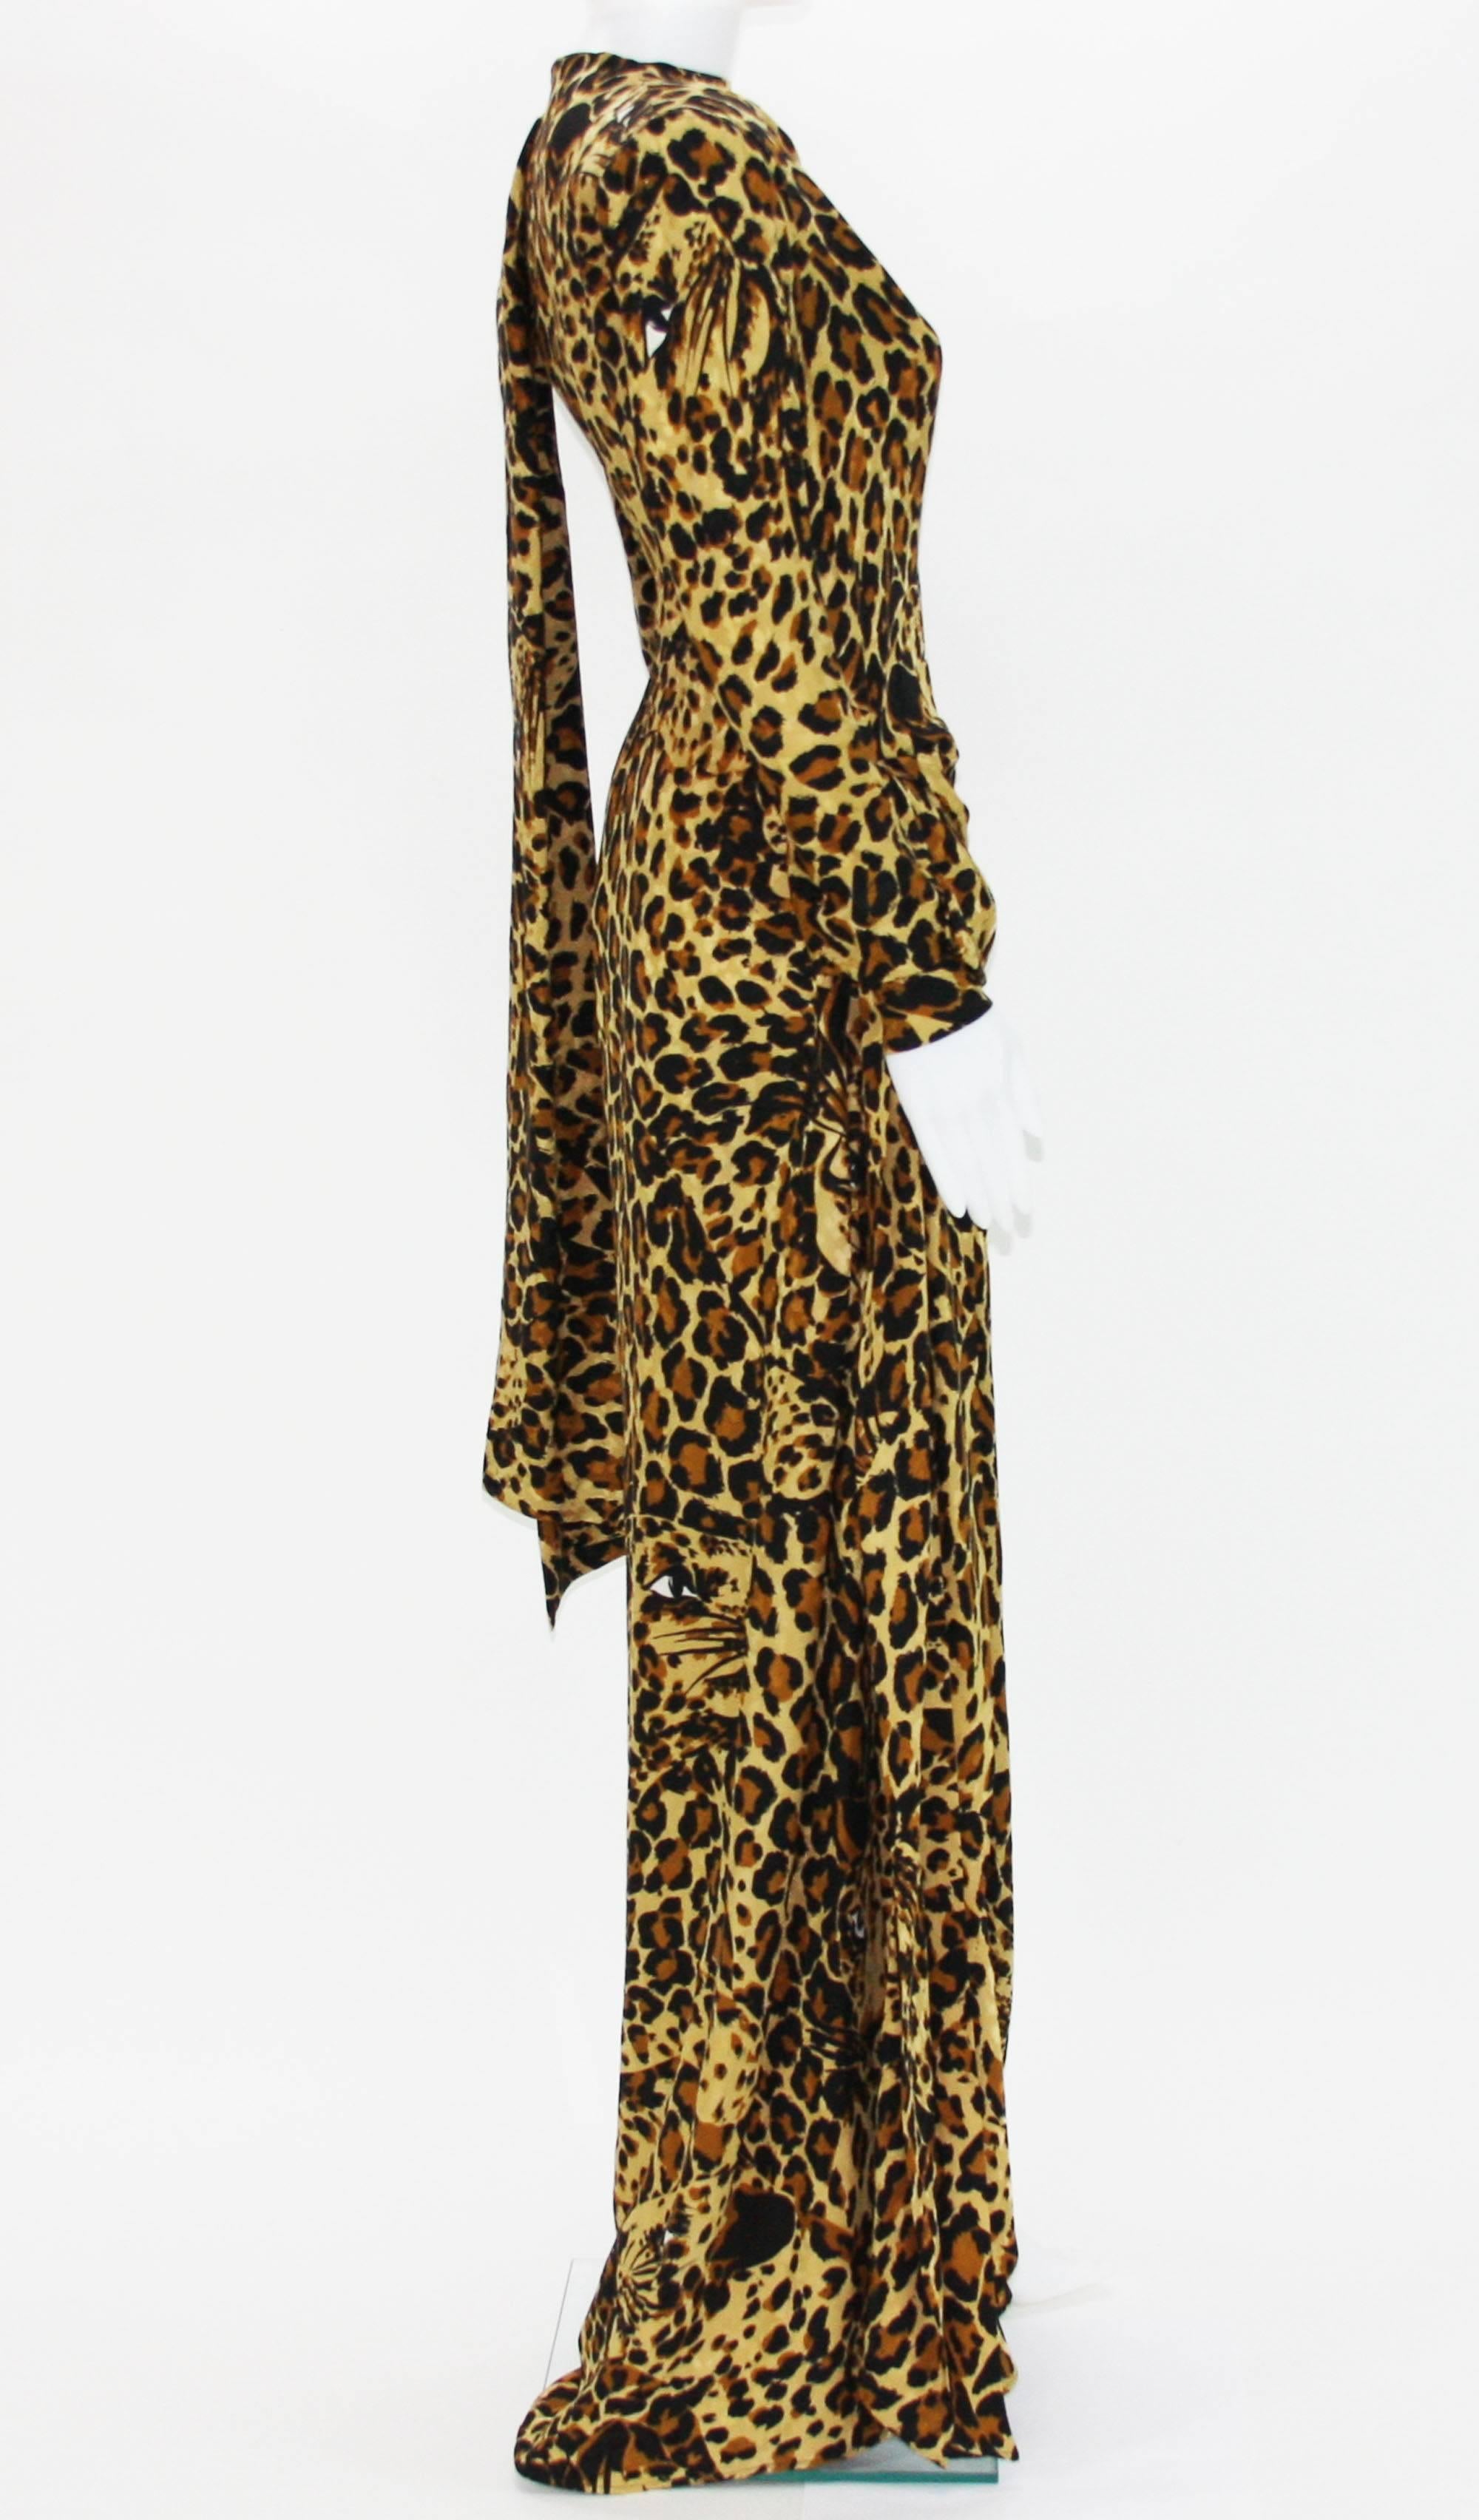 Yves Saint Laurent Runway F/W 1982/83 Leopard Silk Gown with High Slit Scarf Fr. In Excellent Condition For Sale In Montgomery, TX